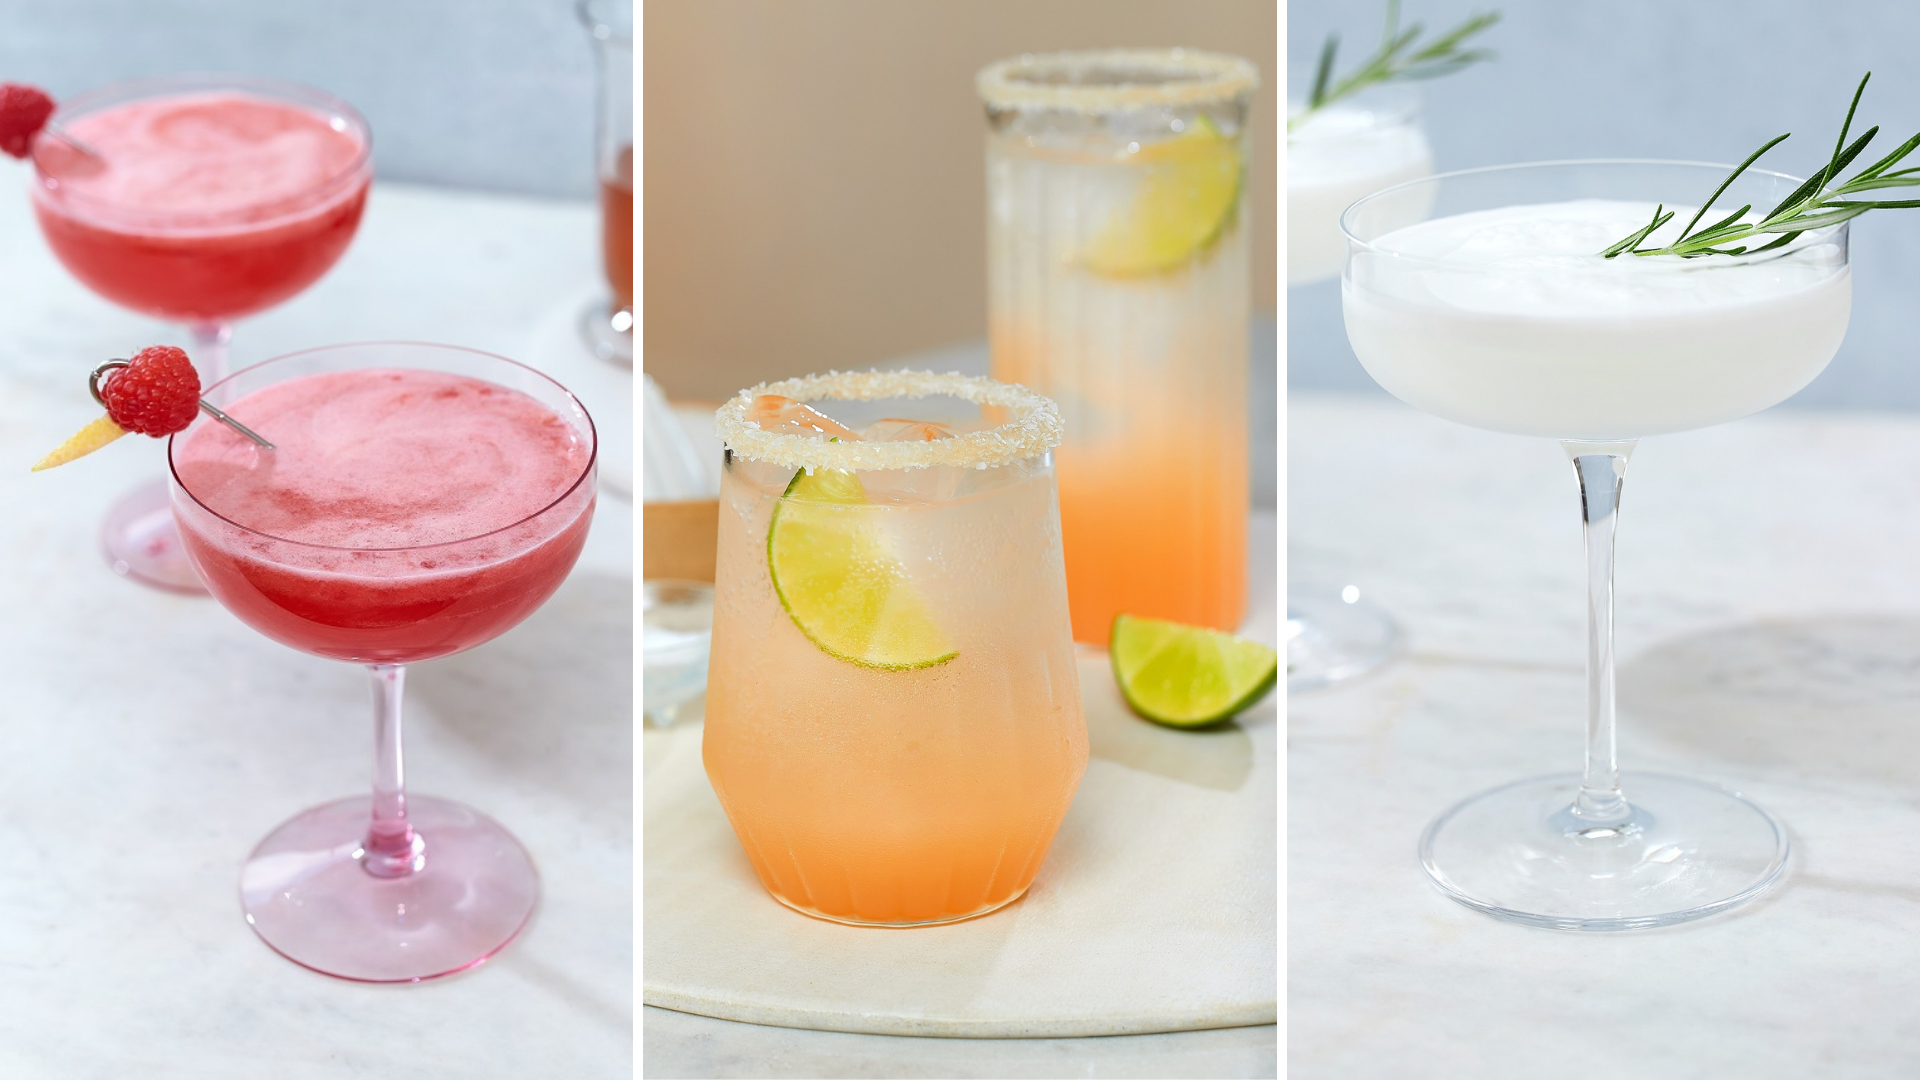 Treat yo'self with elevated dry bevvies you can make at home!